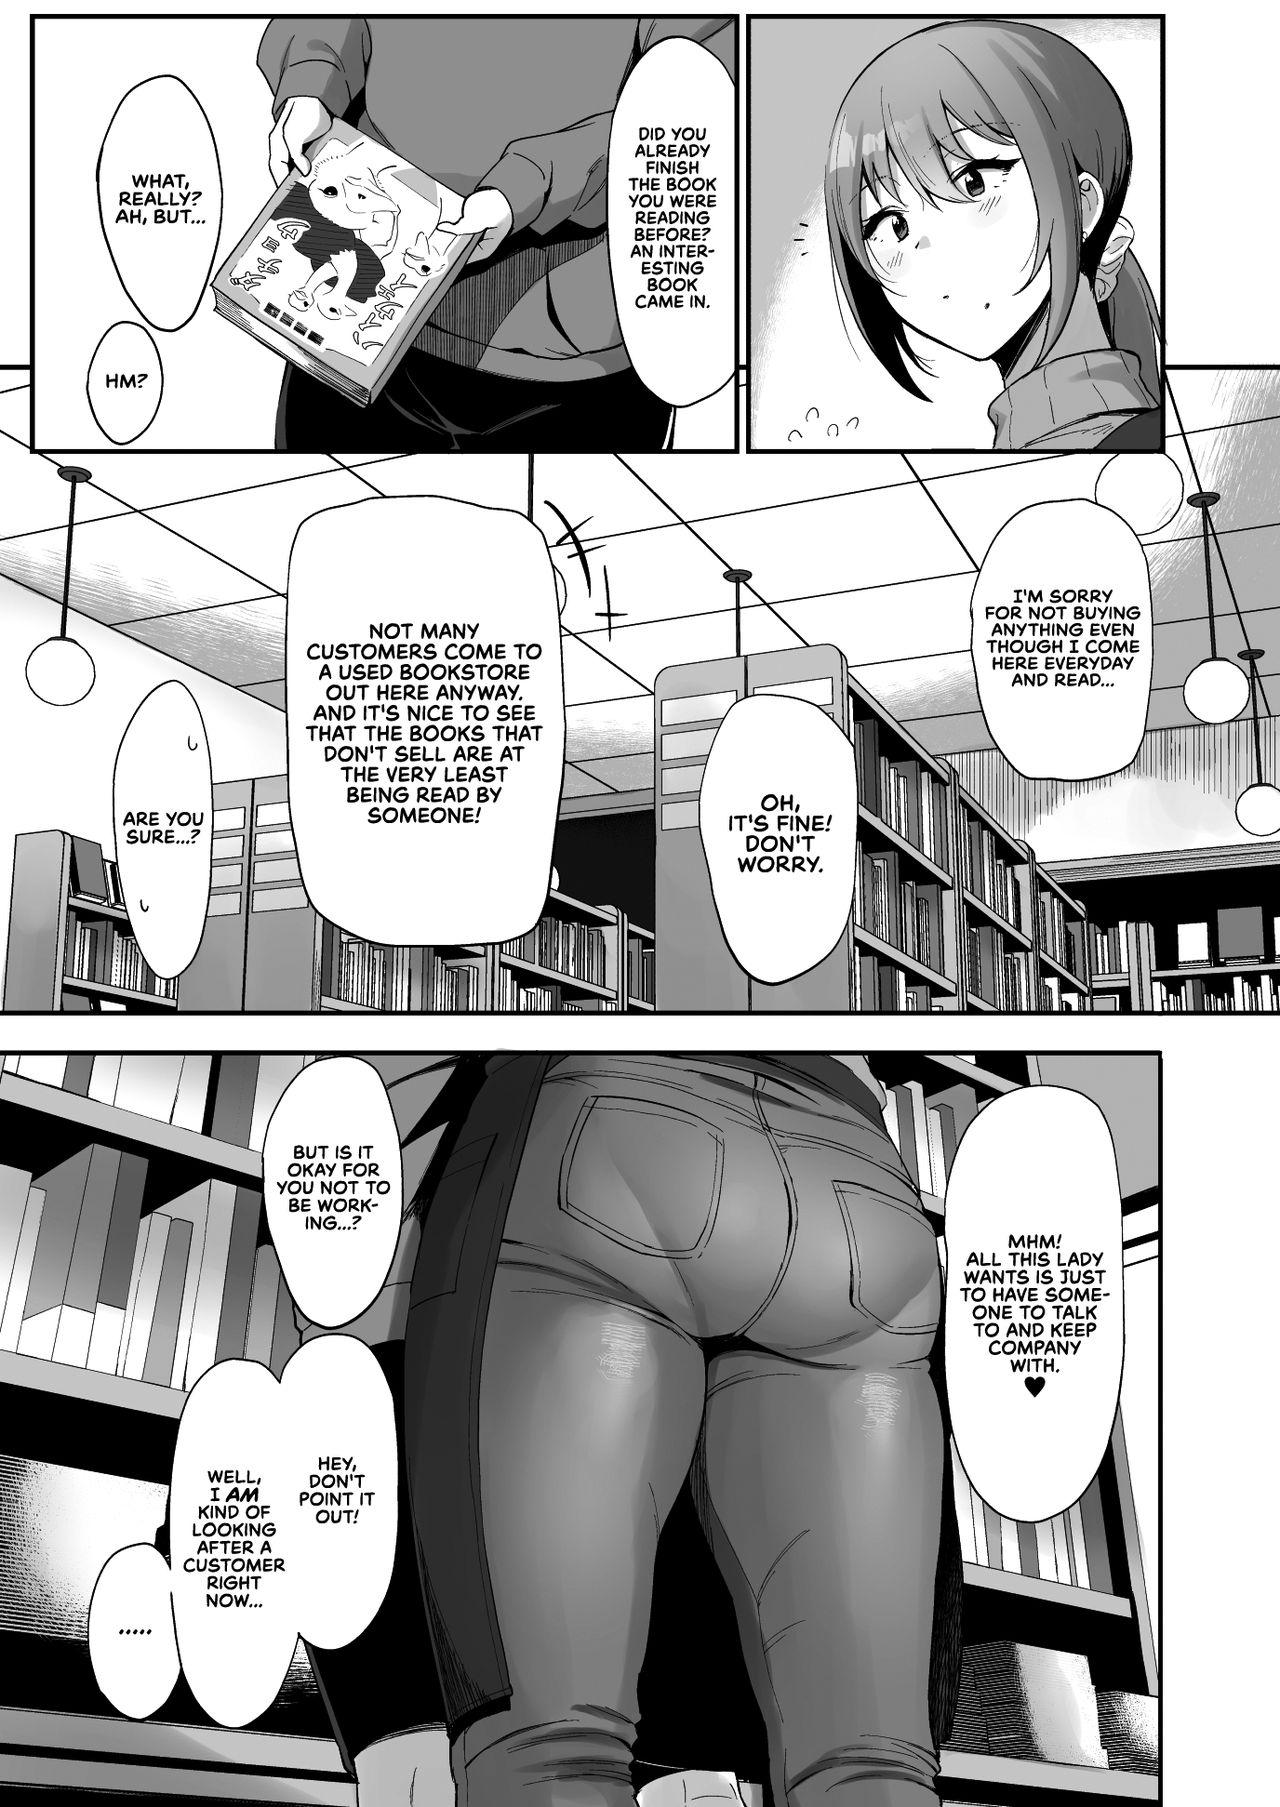 Cameltoe Furuhonya no Onee-san to | With The Lady From The Used Book Shop - Original Spank - Page 6